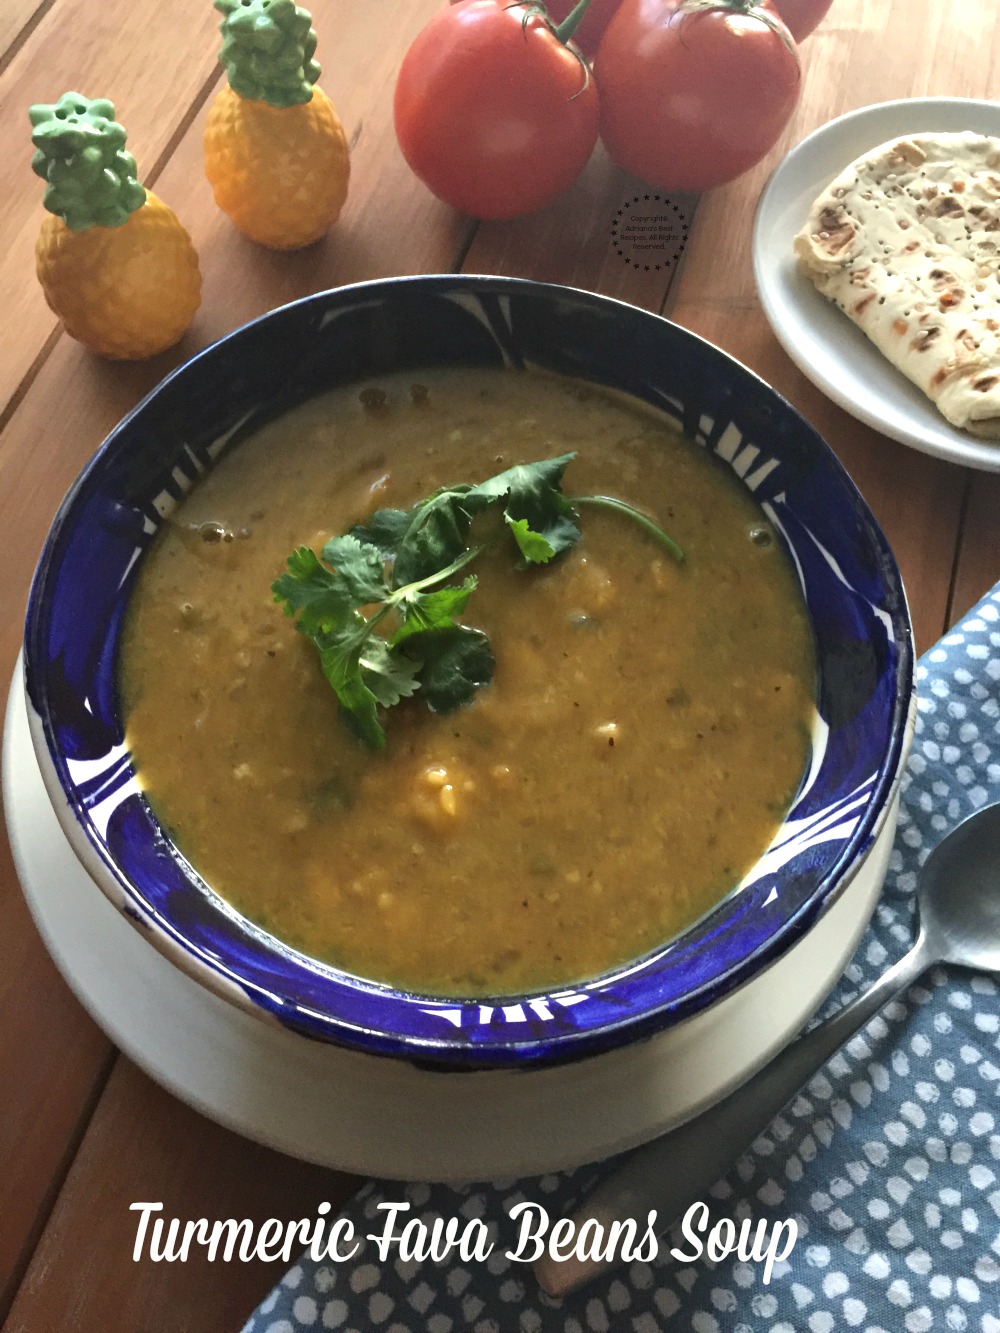 Turmeric Fava Beans Soup a comforting option for winter